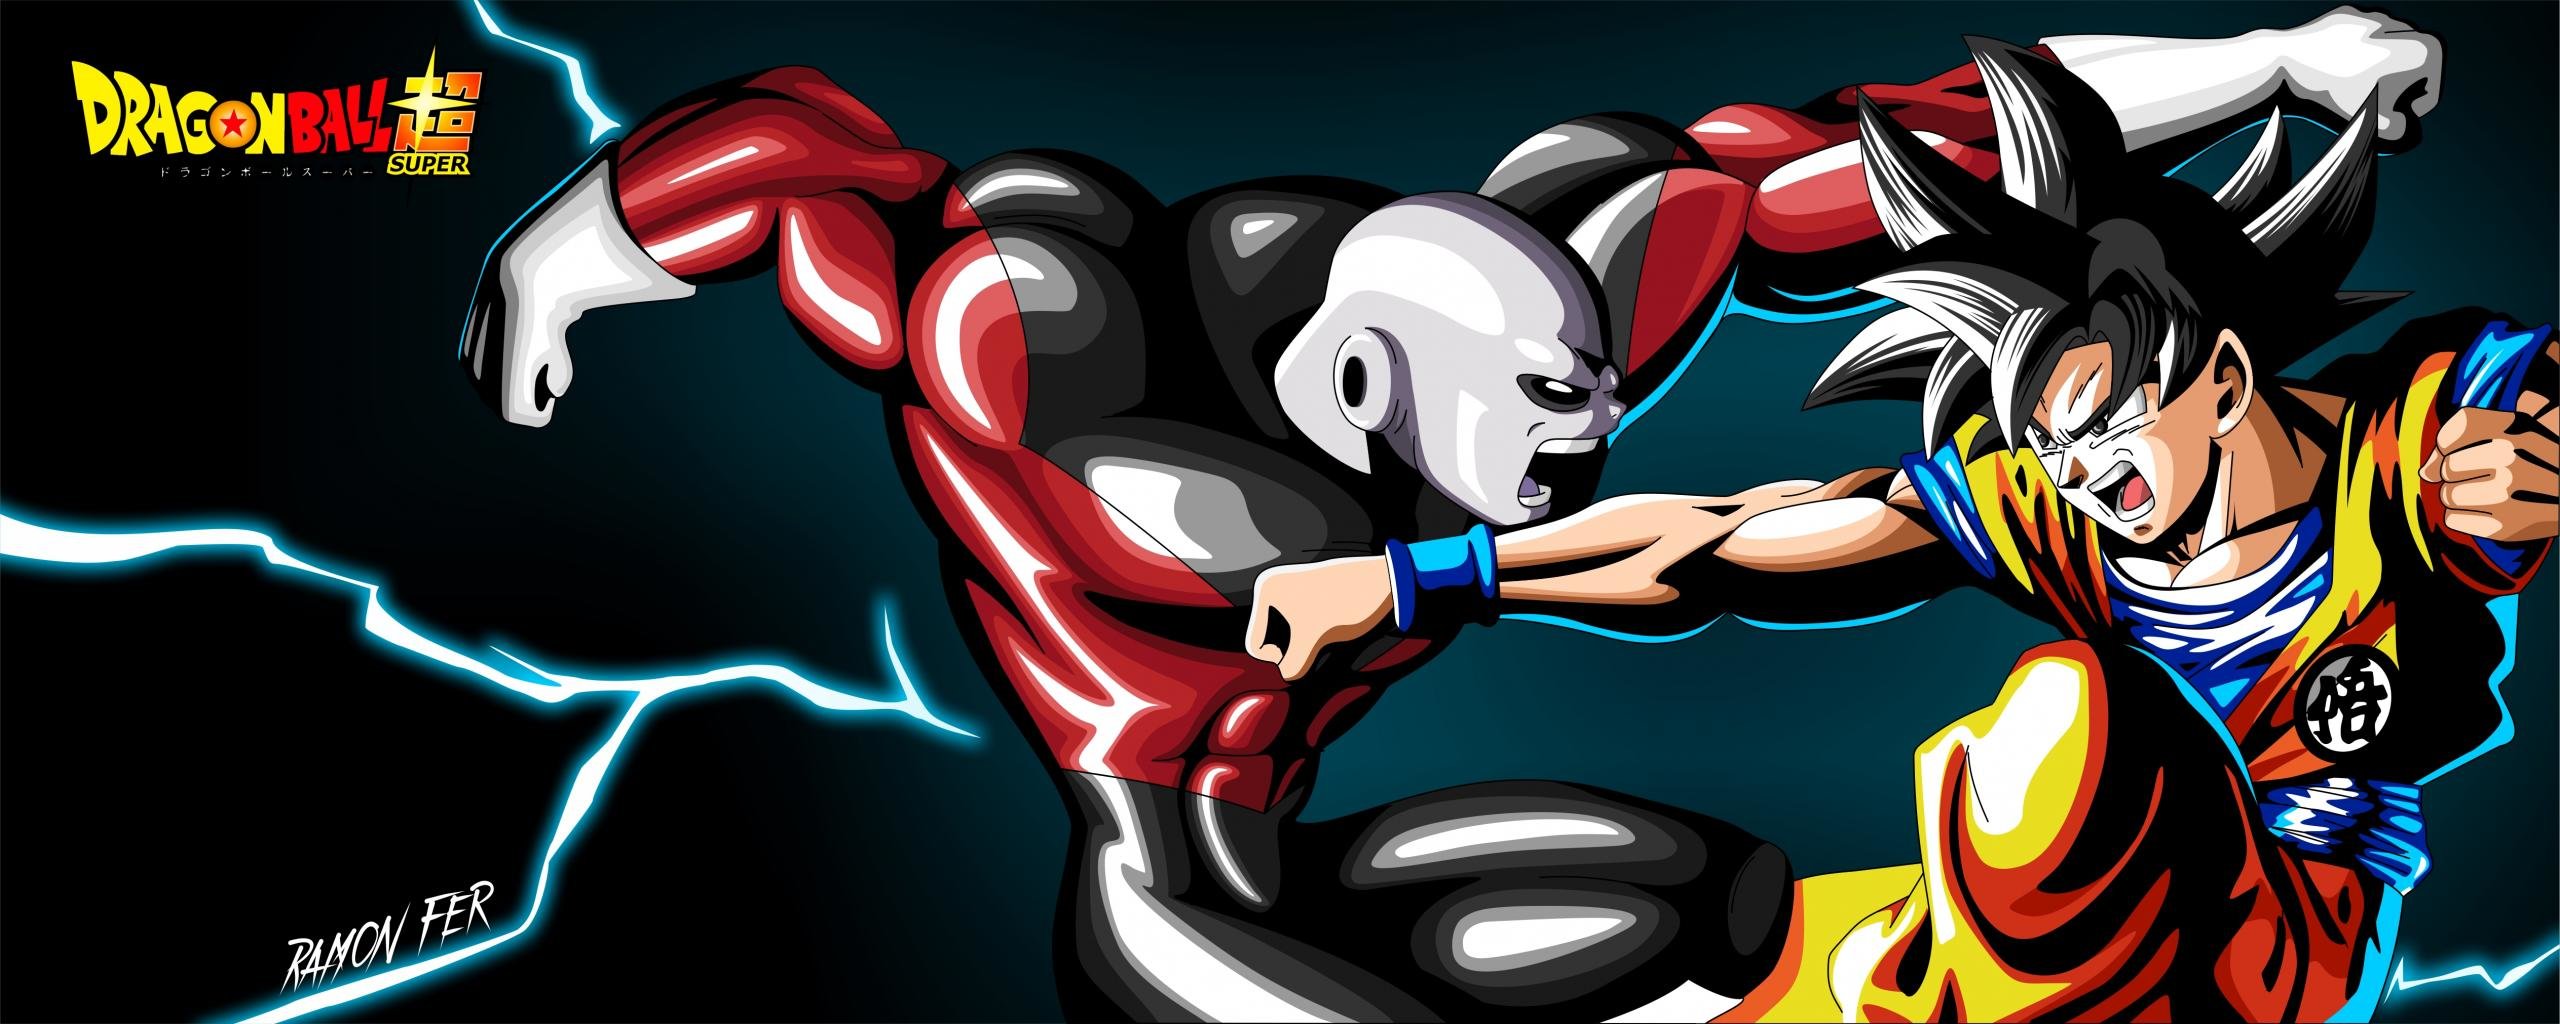 High Resolution Dragon Ball Super Dual Monitor Wallpaper - Dragon Ball Super Vs Jiren , HD Wallpaper & Backgrounds